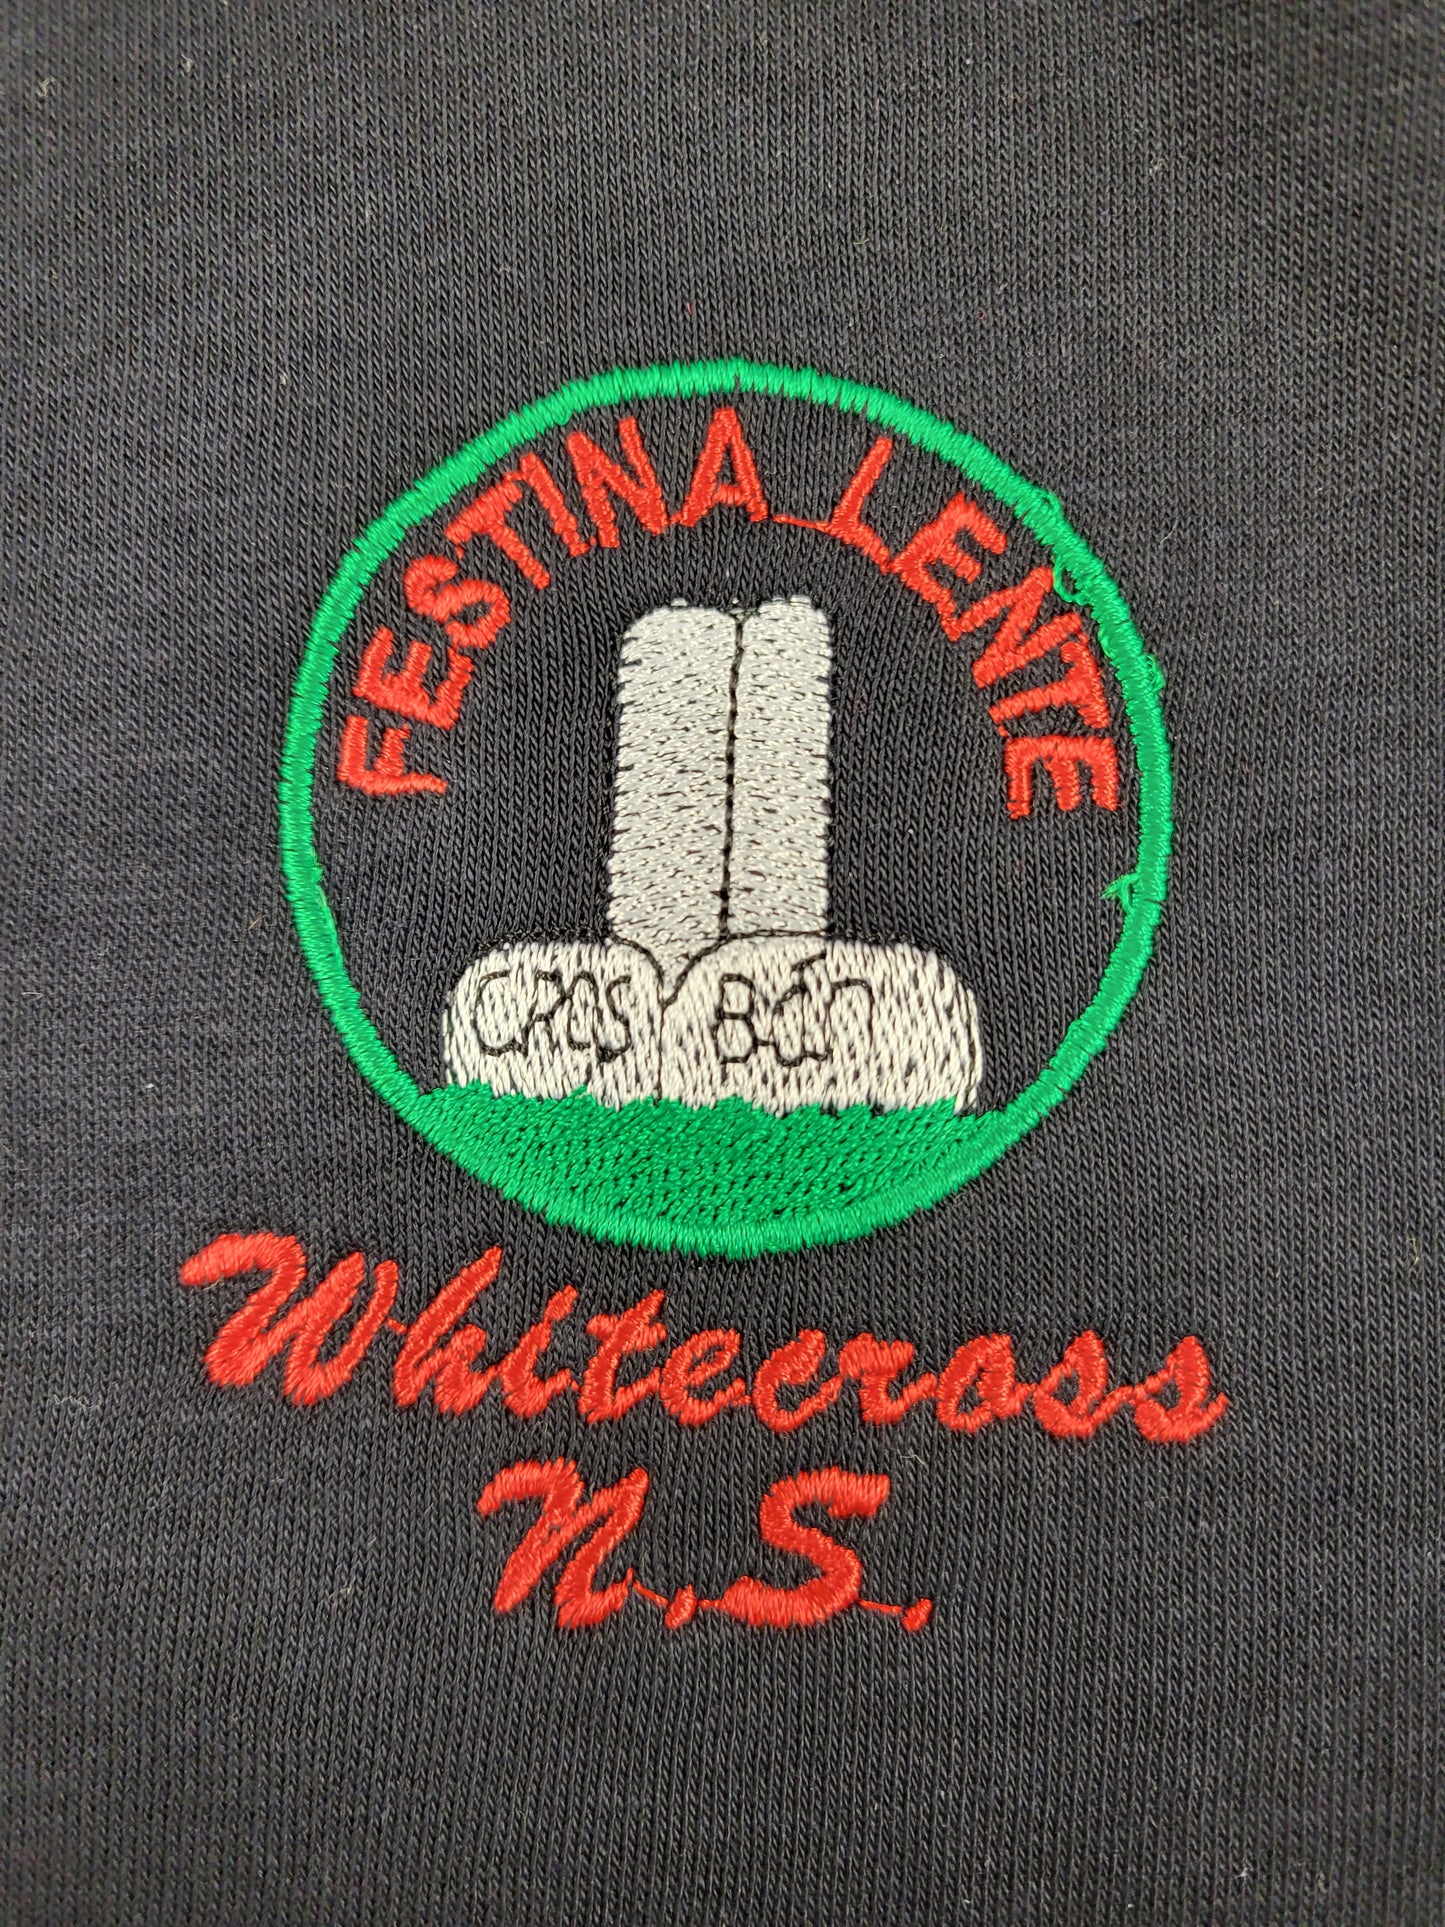 WHITECROSS N.S TRACKSUIT TOP